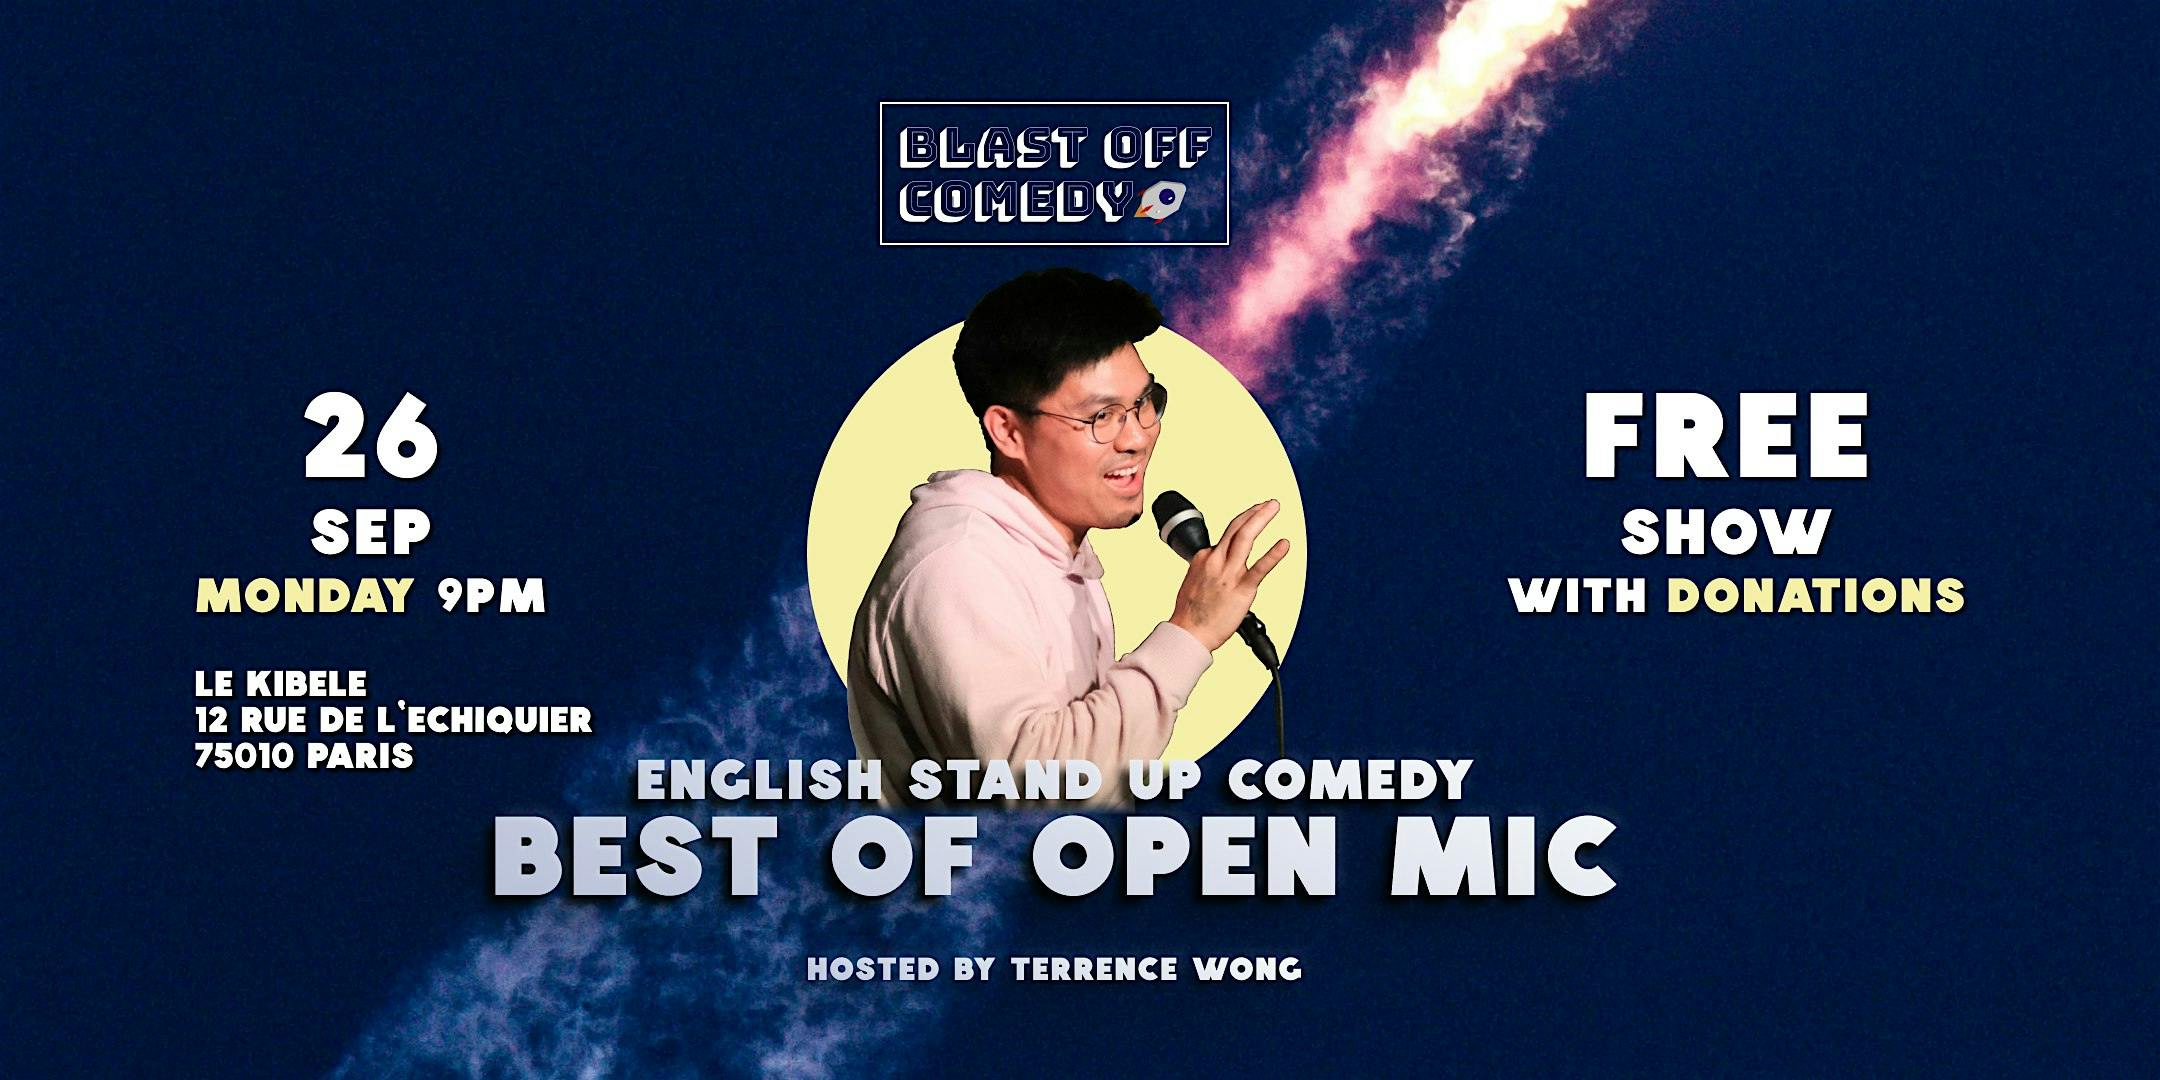 English Stand Up Comedy Best of Open Mic 26.09 - Blast Off Comedy logo